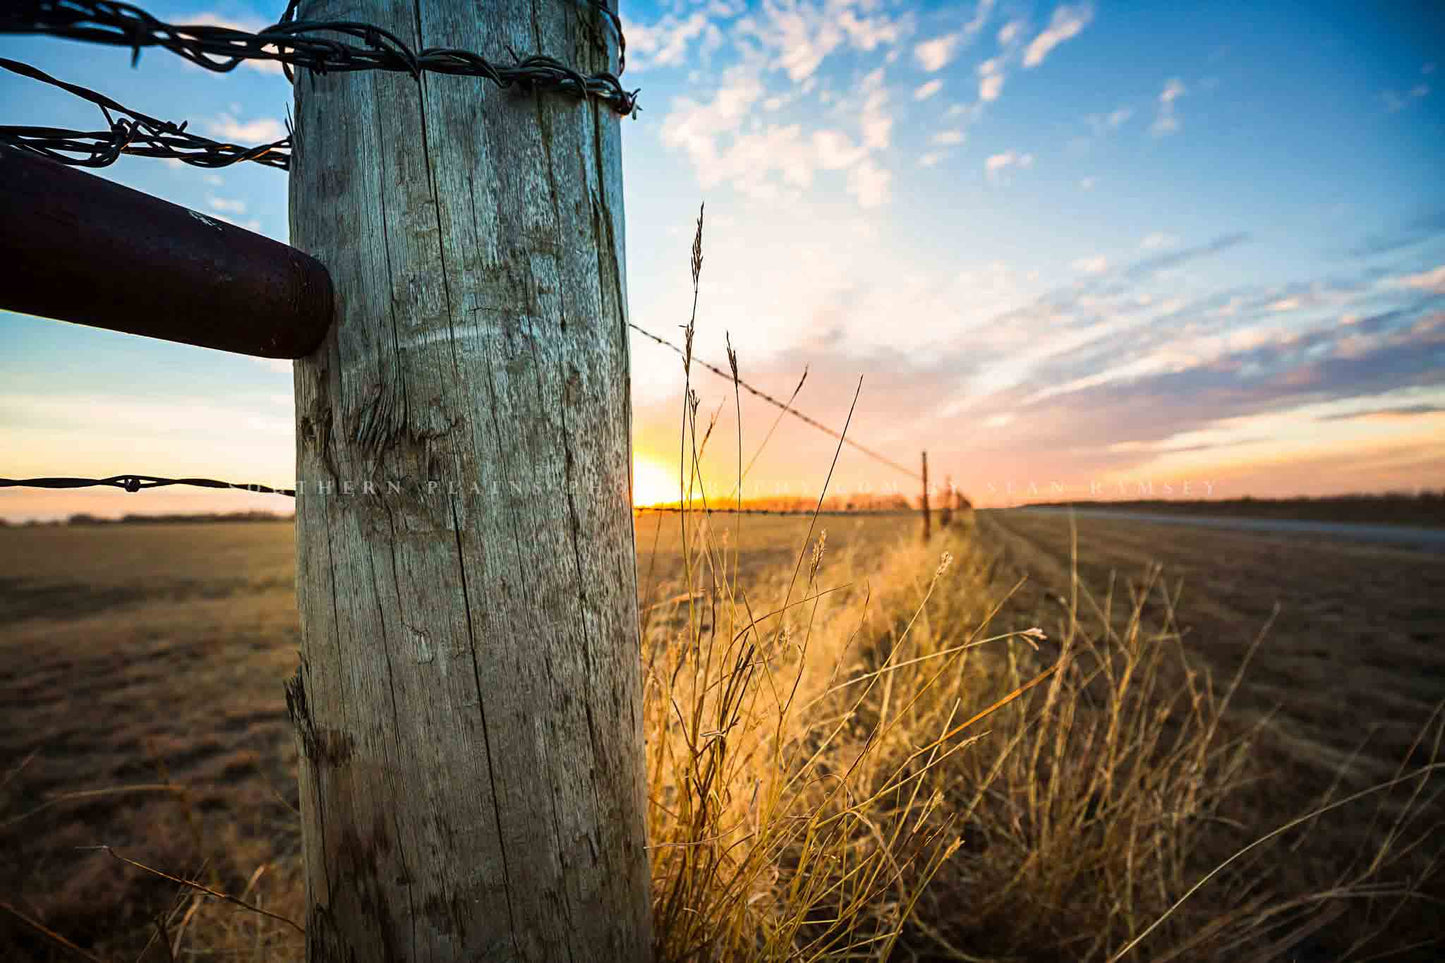 Country photography print of a fence post and prairie grass illuminated by sunlight at sunset on a chilly winter evening in Oklahoma by Sean Ramsey of Southern Plains Photography.